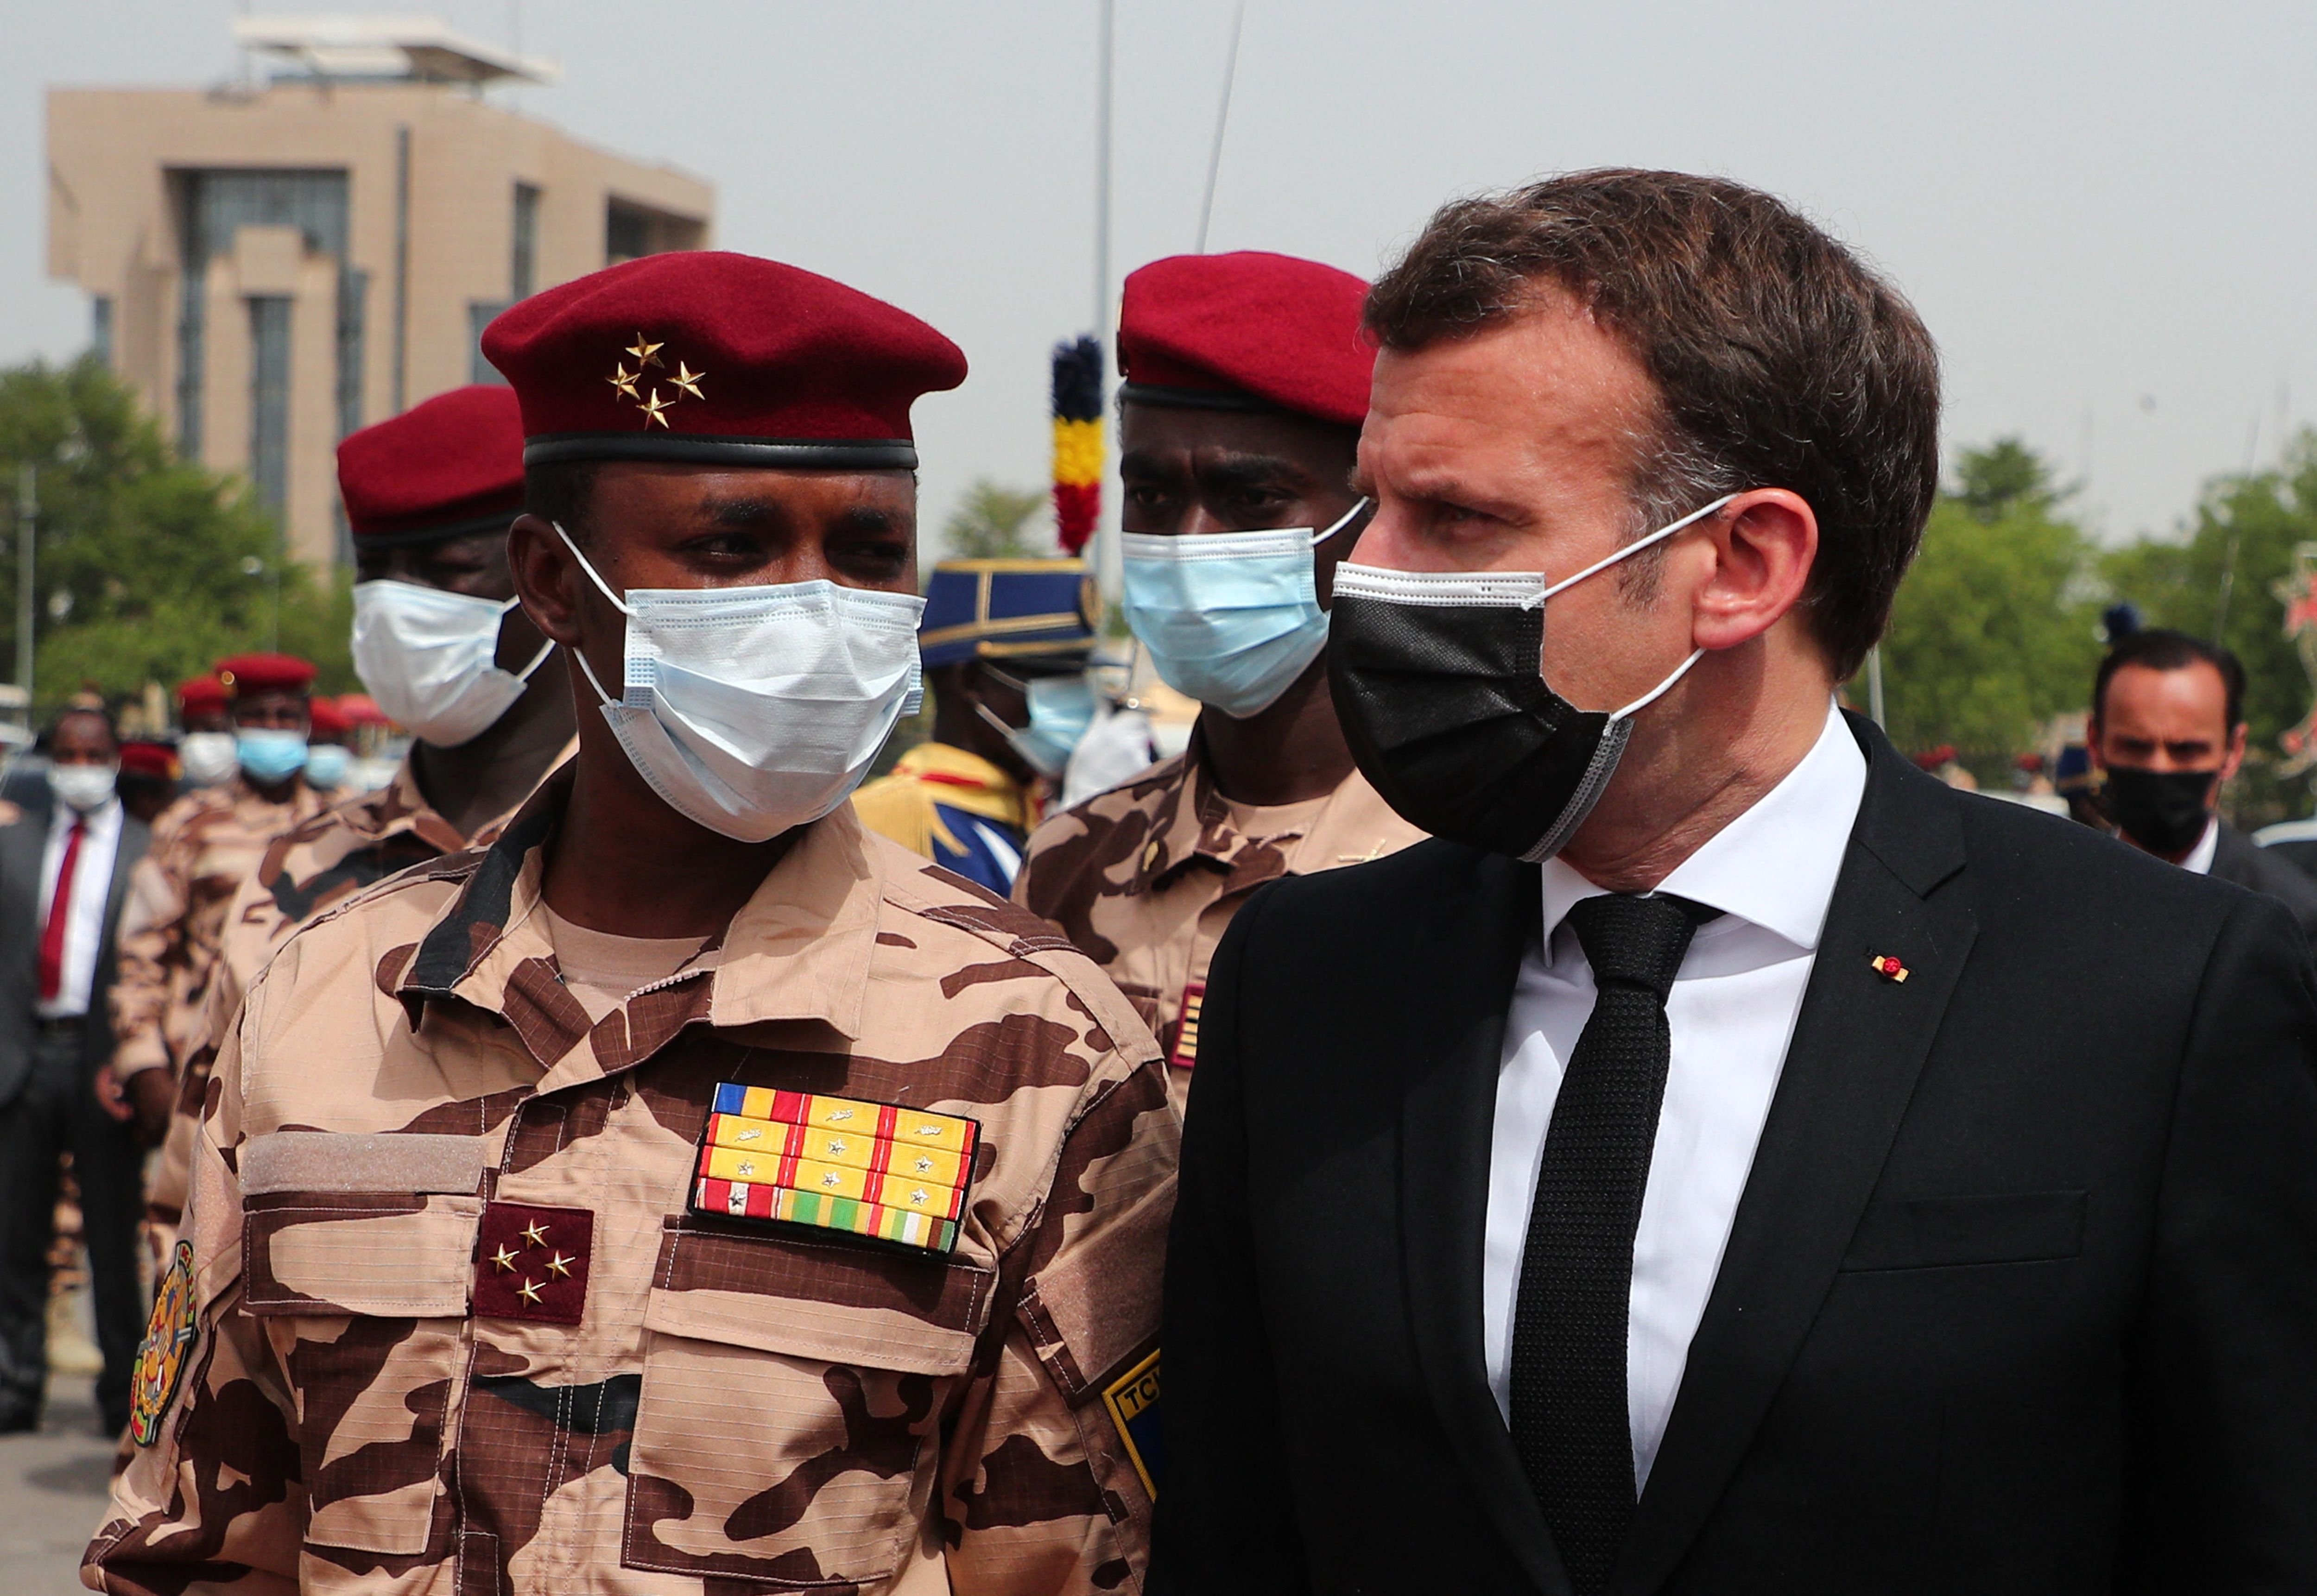 Photo above: French President Emmanuel Macron (C) flanked by the son of the late Chadian President Idriss Deby, Mahamat Idriss Deby (L), arrives to attend the state funeral for Idriss Deby in N’Djamena on April 23, 2021. Photo by CHRISTOPHE PETIT TESSON/POOL/AFP via Getty Images.